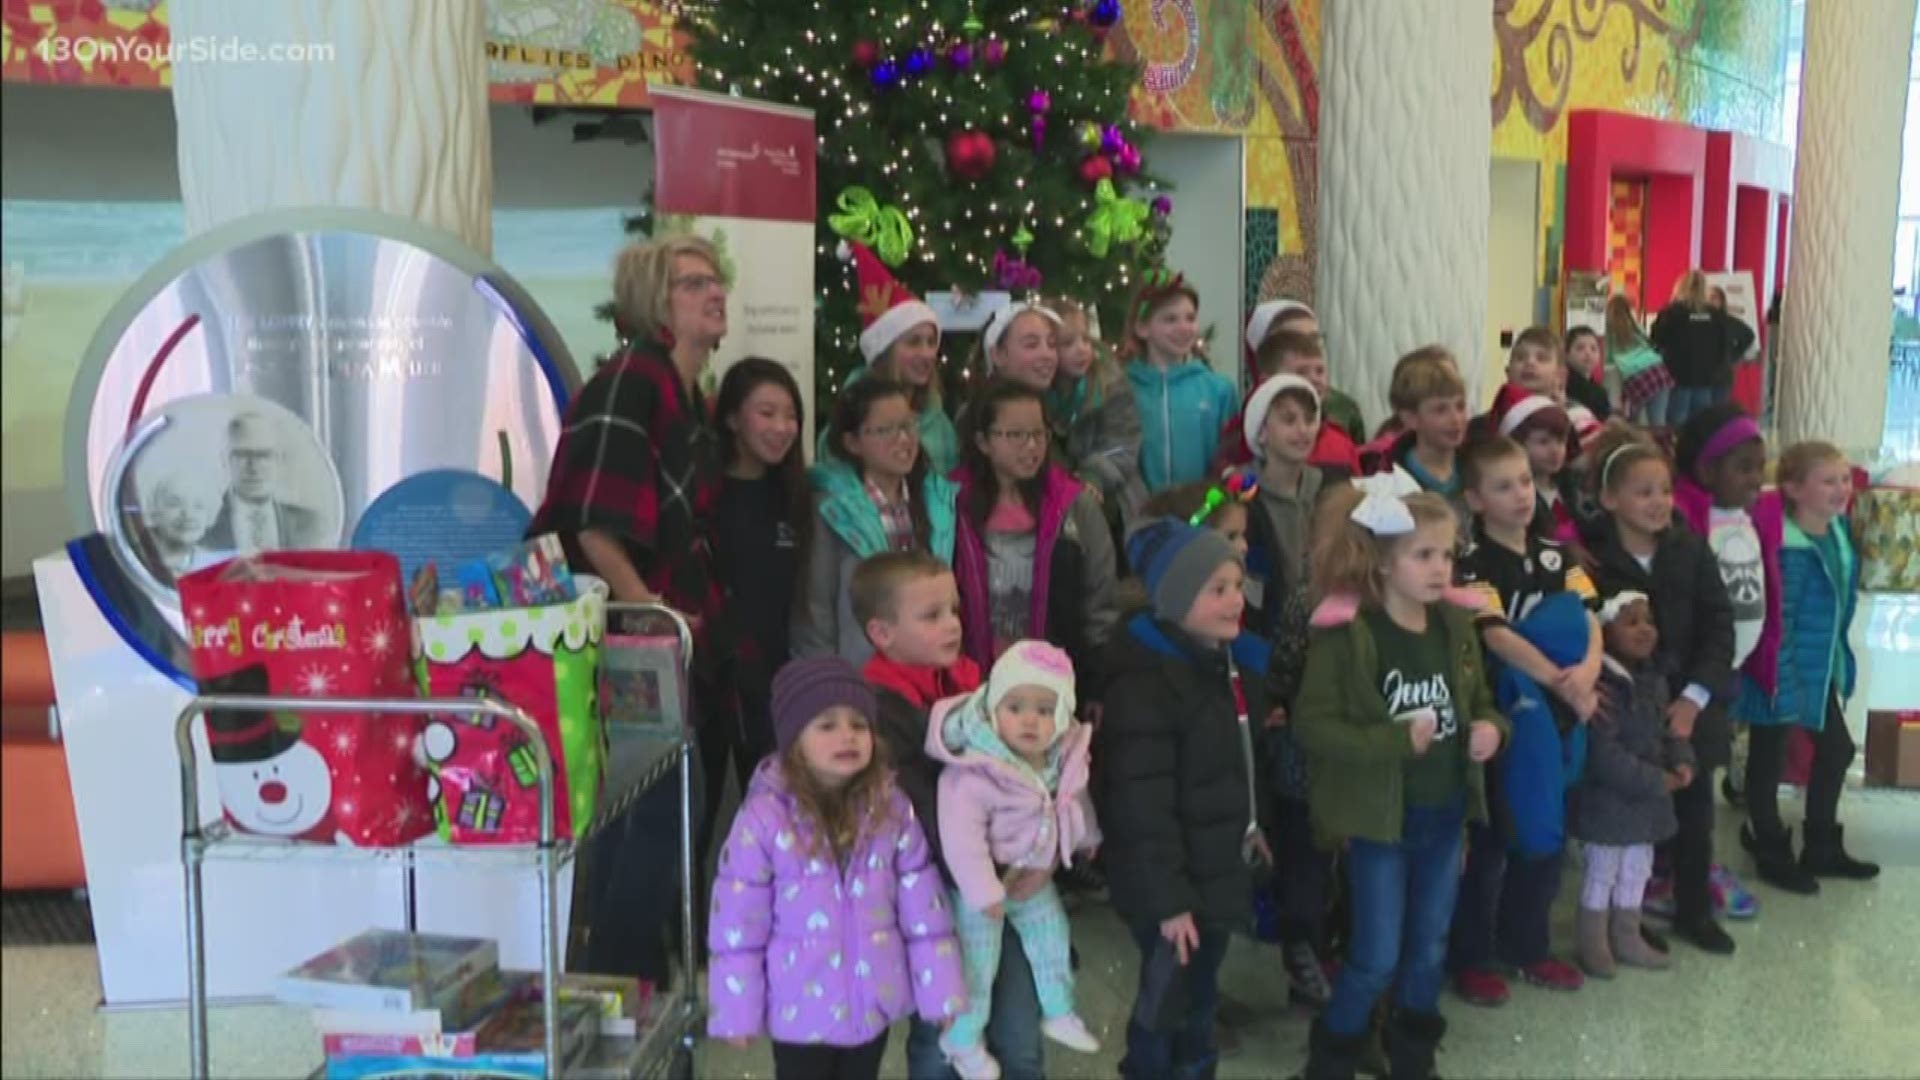 A group of Jenison elementary school kids helped spread some holiday cheer on Friday.